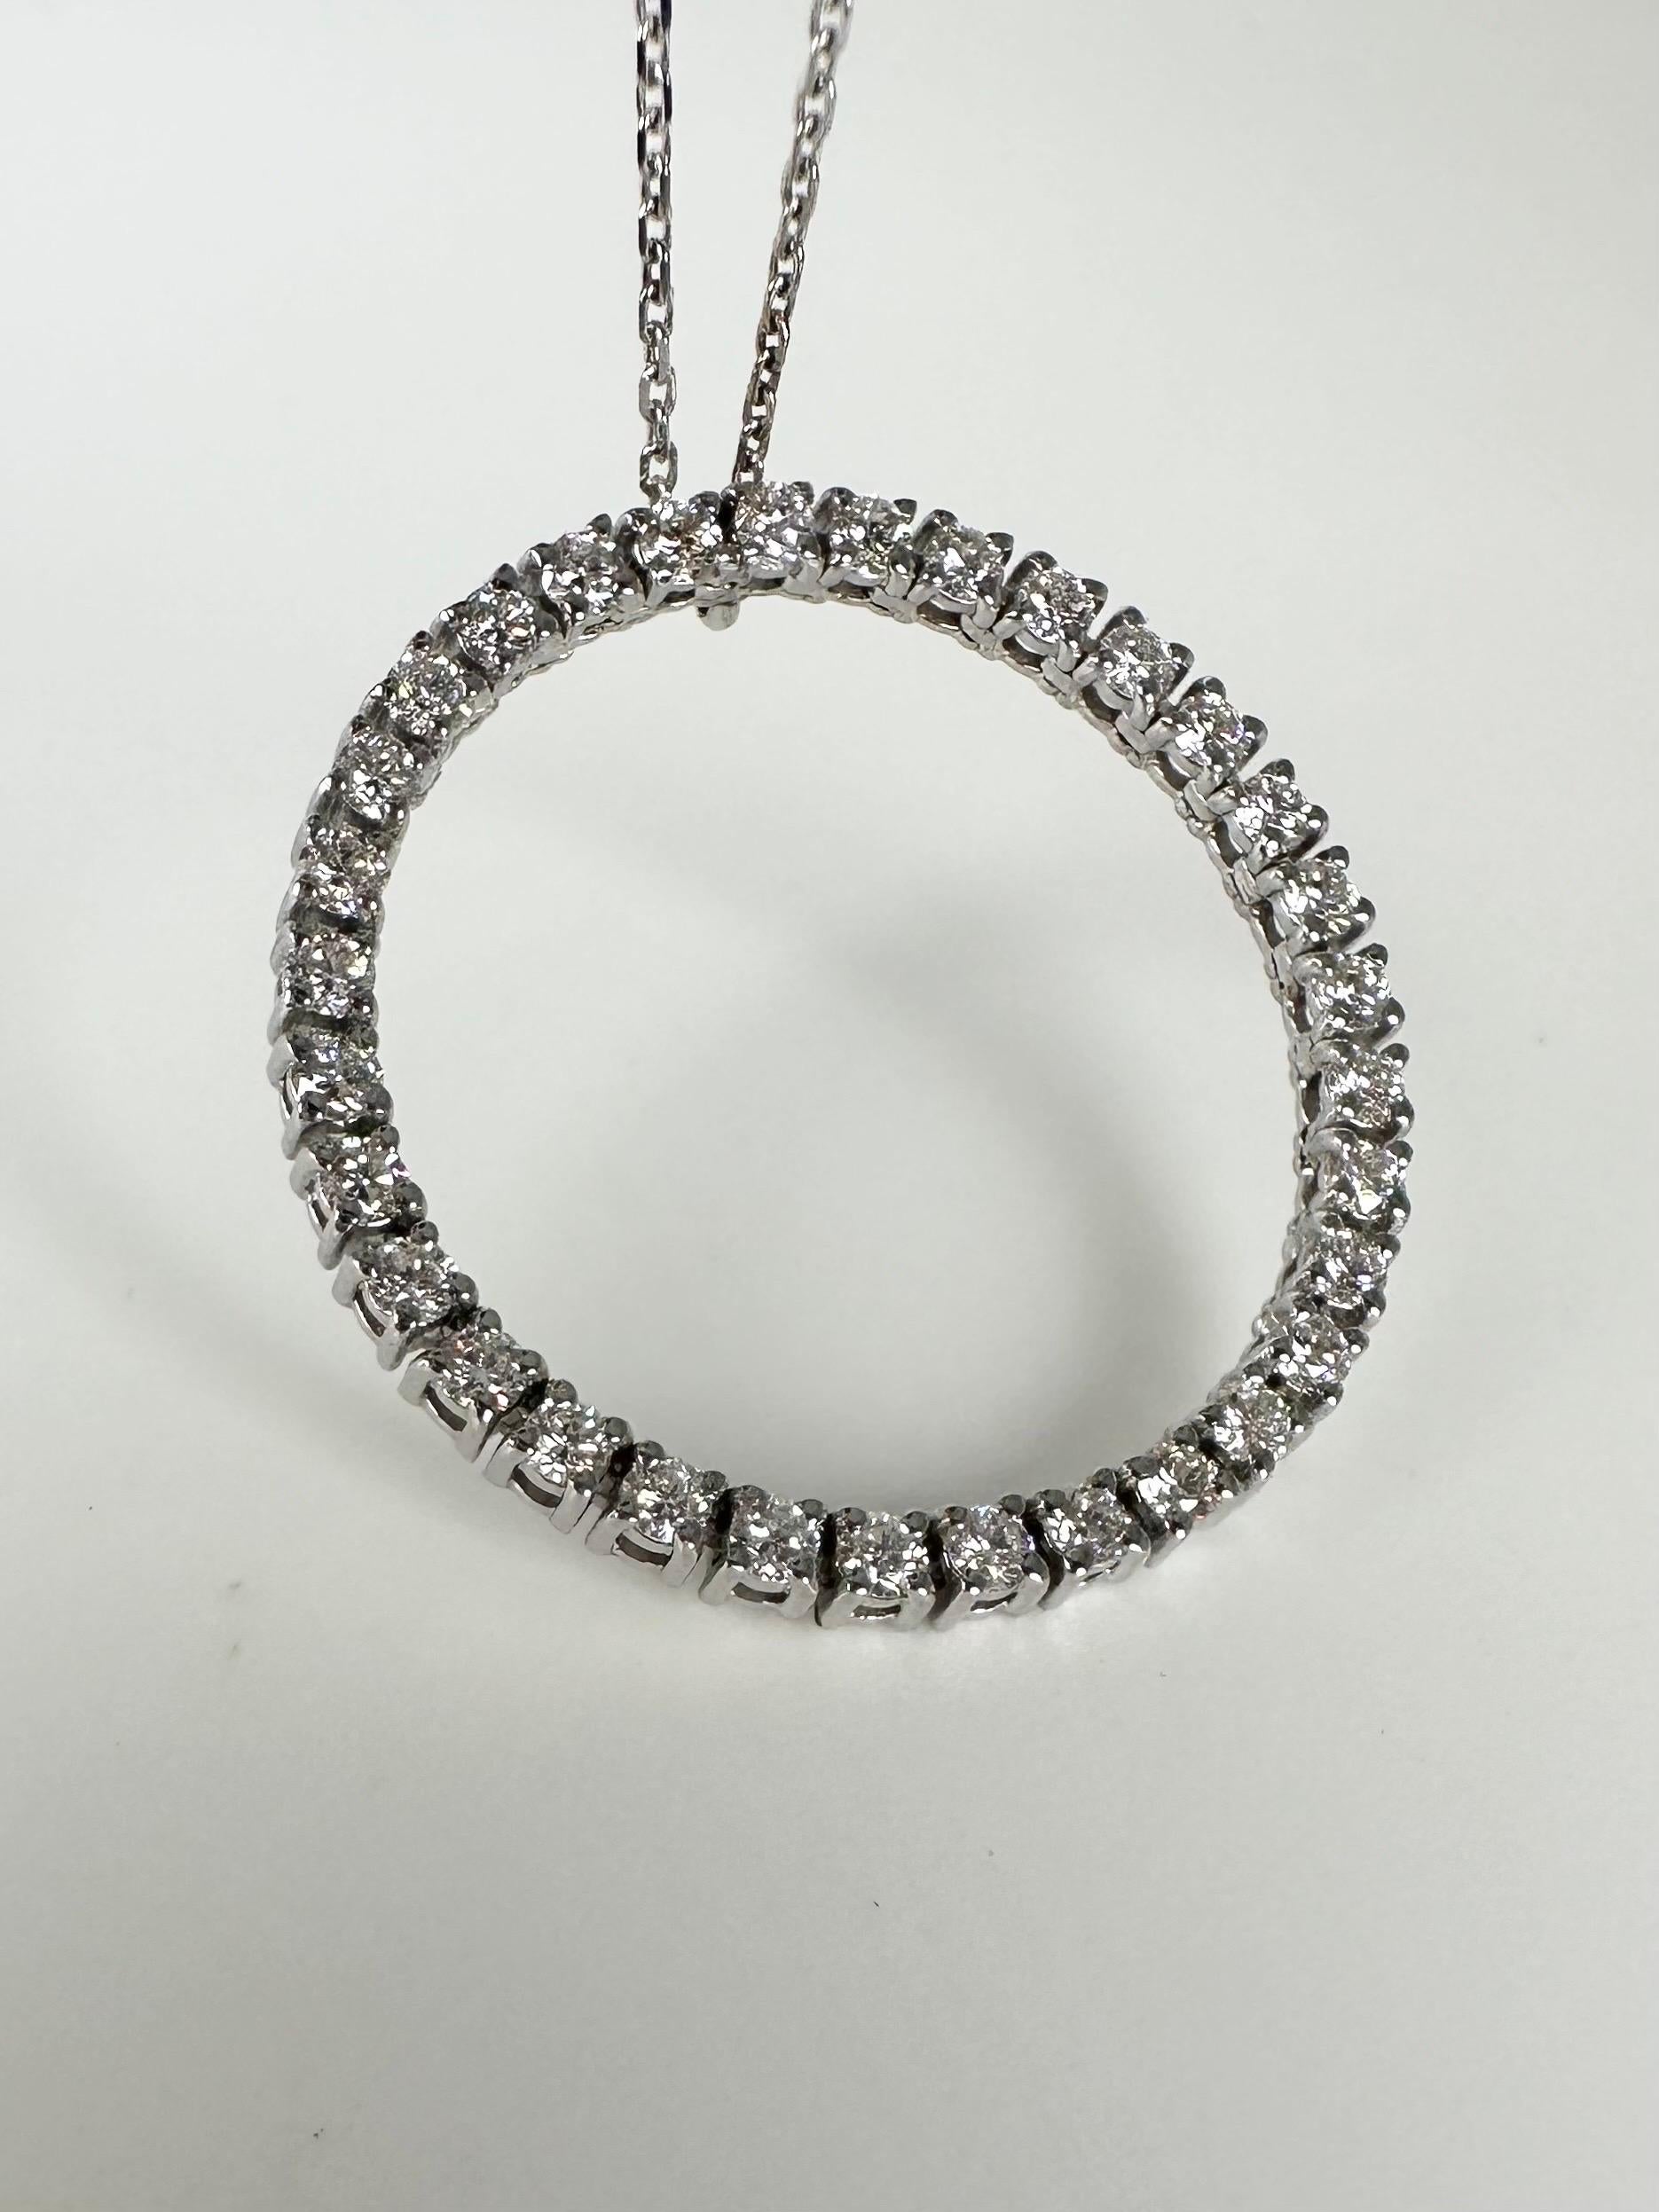 Unique flexible circle pendant made with natural diamonds in 14KT white gold, a circle of love and infinity!

GOLD: 14KT gold
18 inches long
NATURAL DIAMOND(S)
Clarity/Color: VS-SI/F-G
Carat:0.196ct
Cut:Round